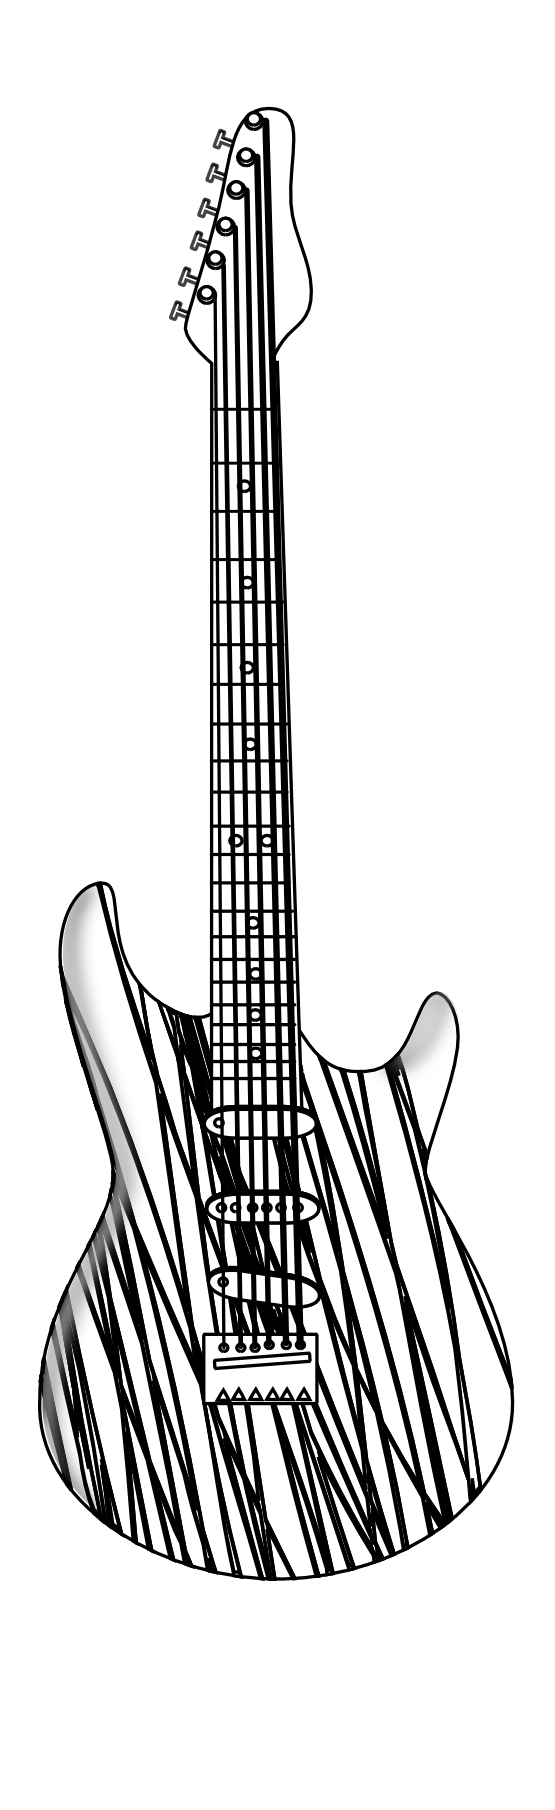 Guitar clipart royalty free. Black and white music